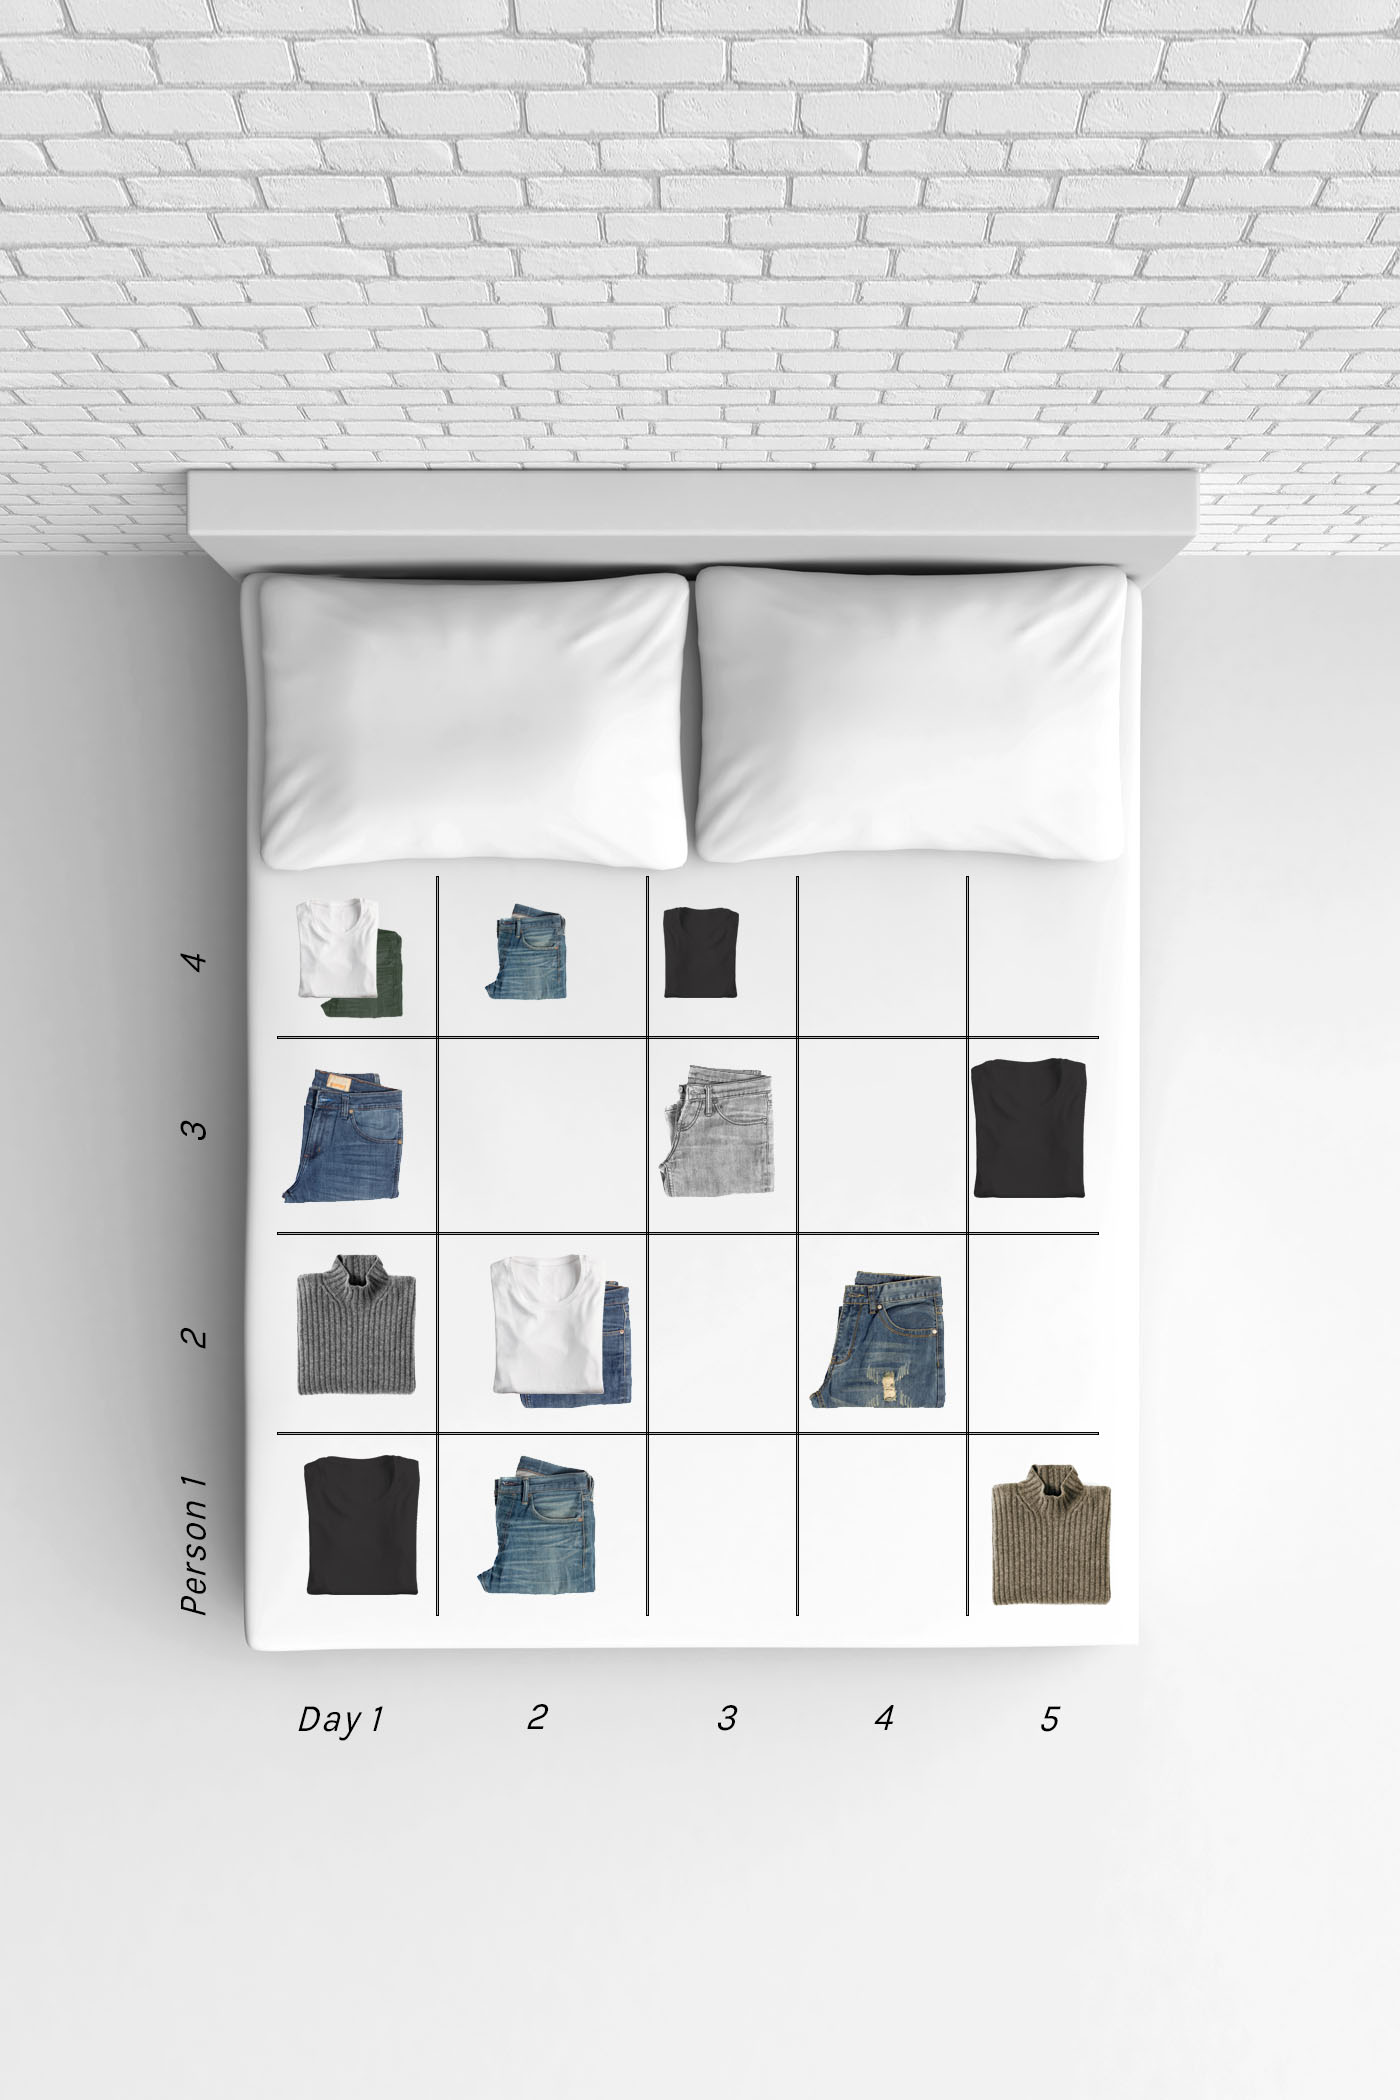 Travel light grid system, an easy and visual way to pack light for any amount of days and any amount of people.